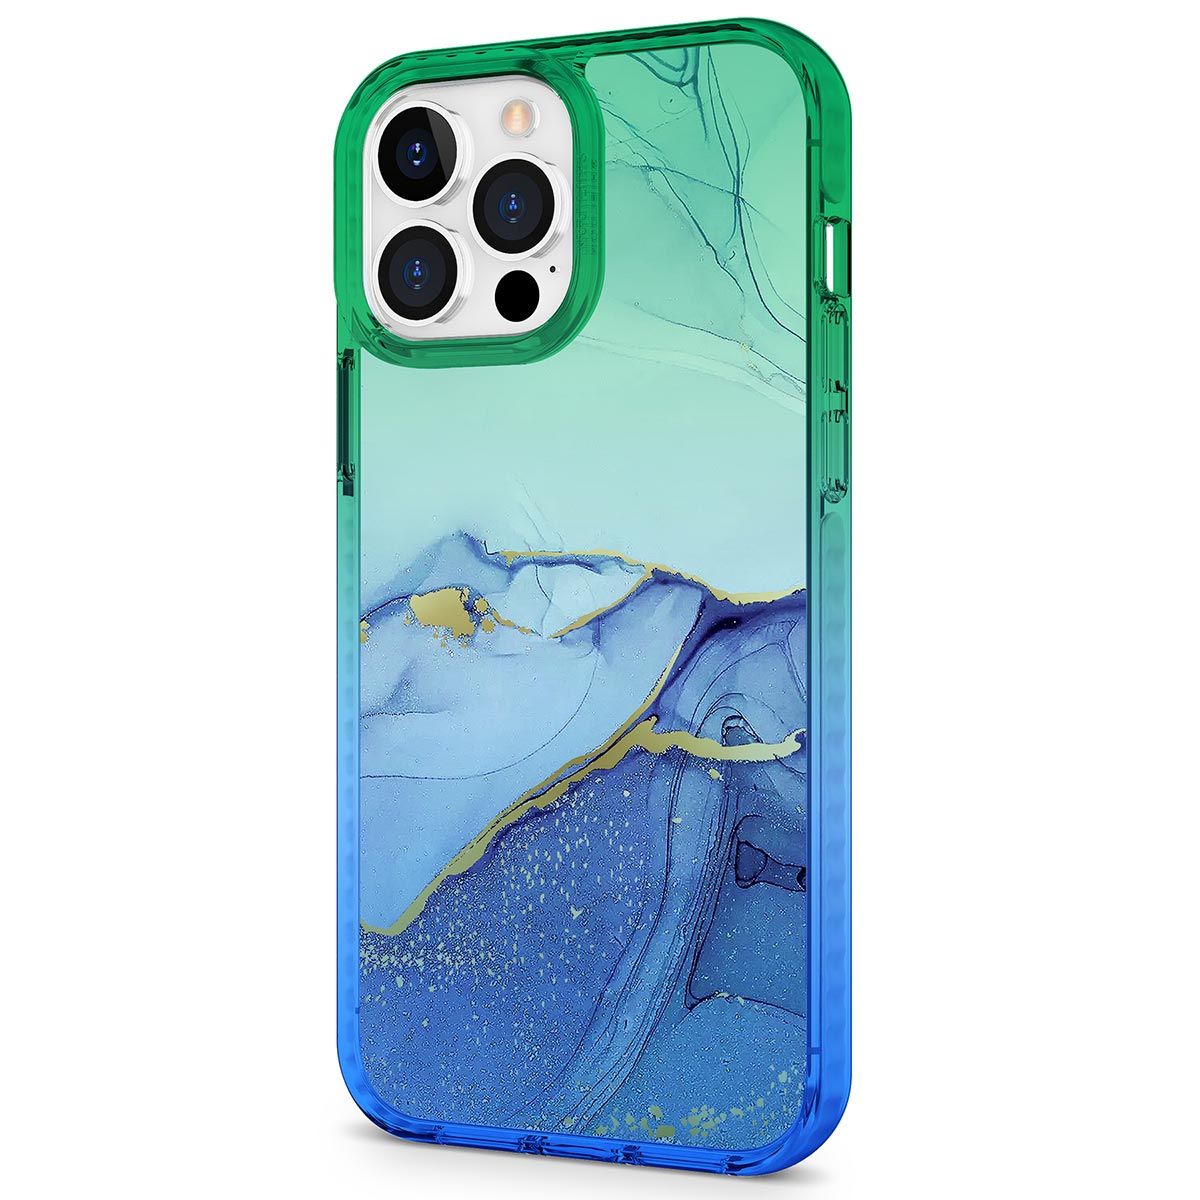 iPhone X 10 Case Samsung Galaxy S10 S8 Light Blue Abstract Marble Cover iPhone 11 Pro max iPhone XS iPhone 8 7 plus case iPhone XS Max